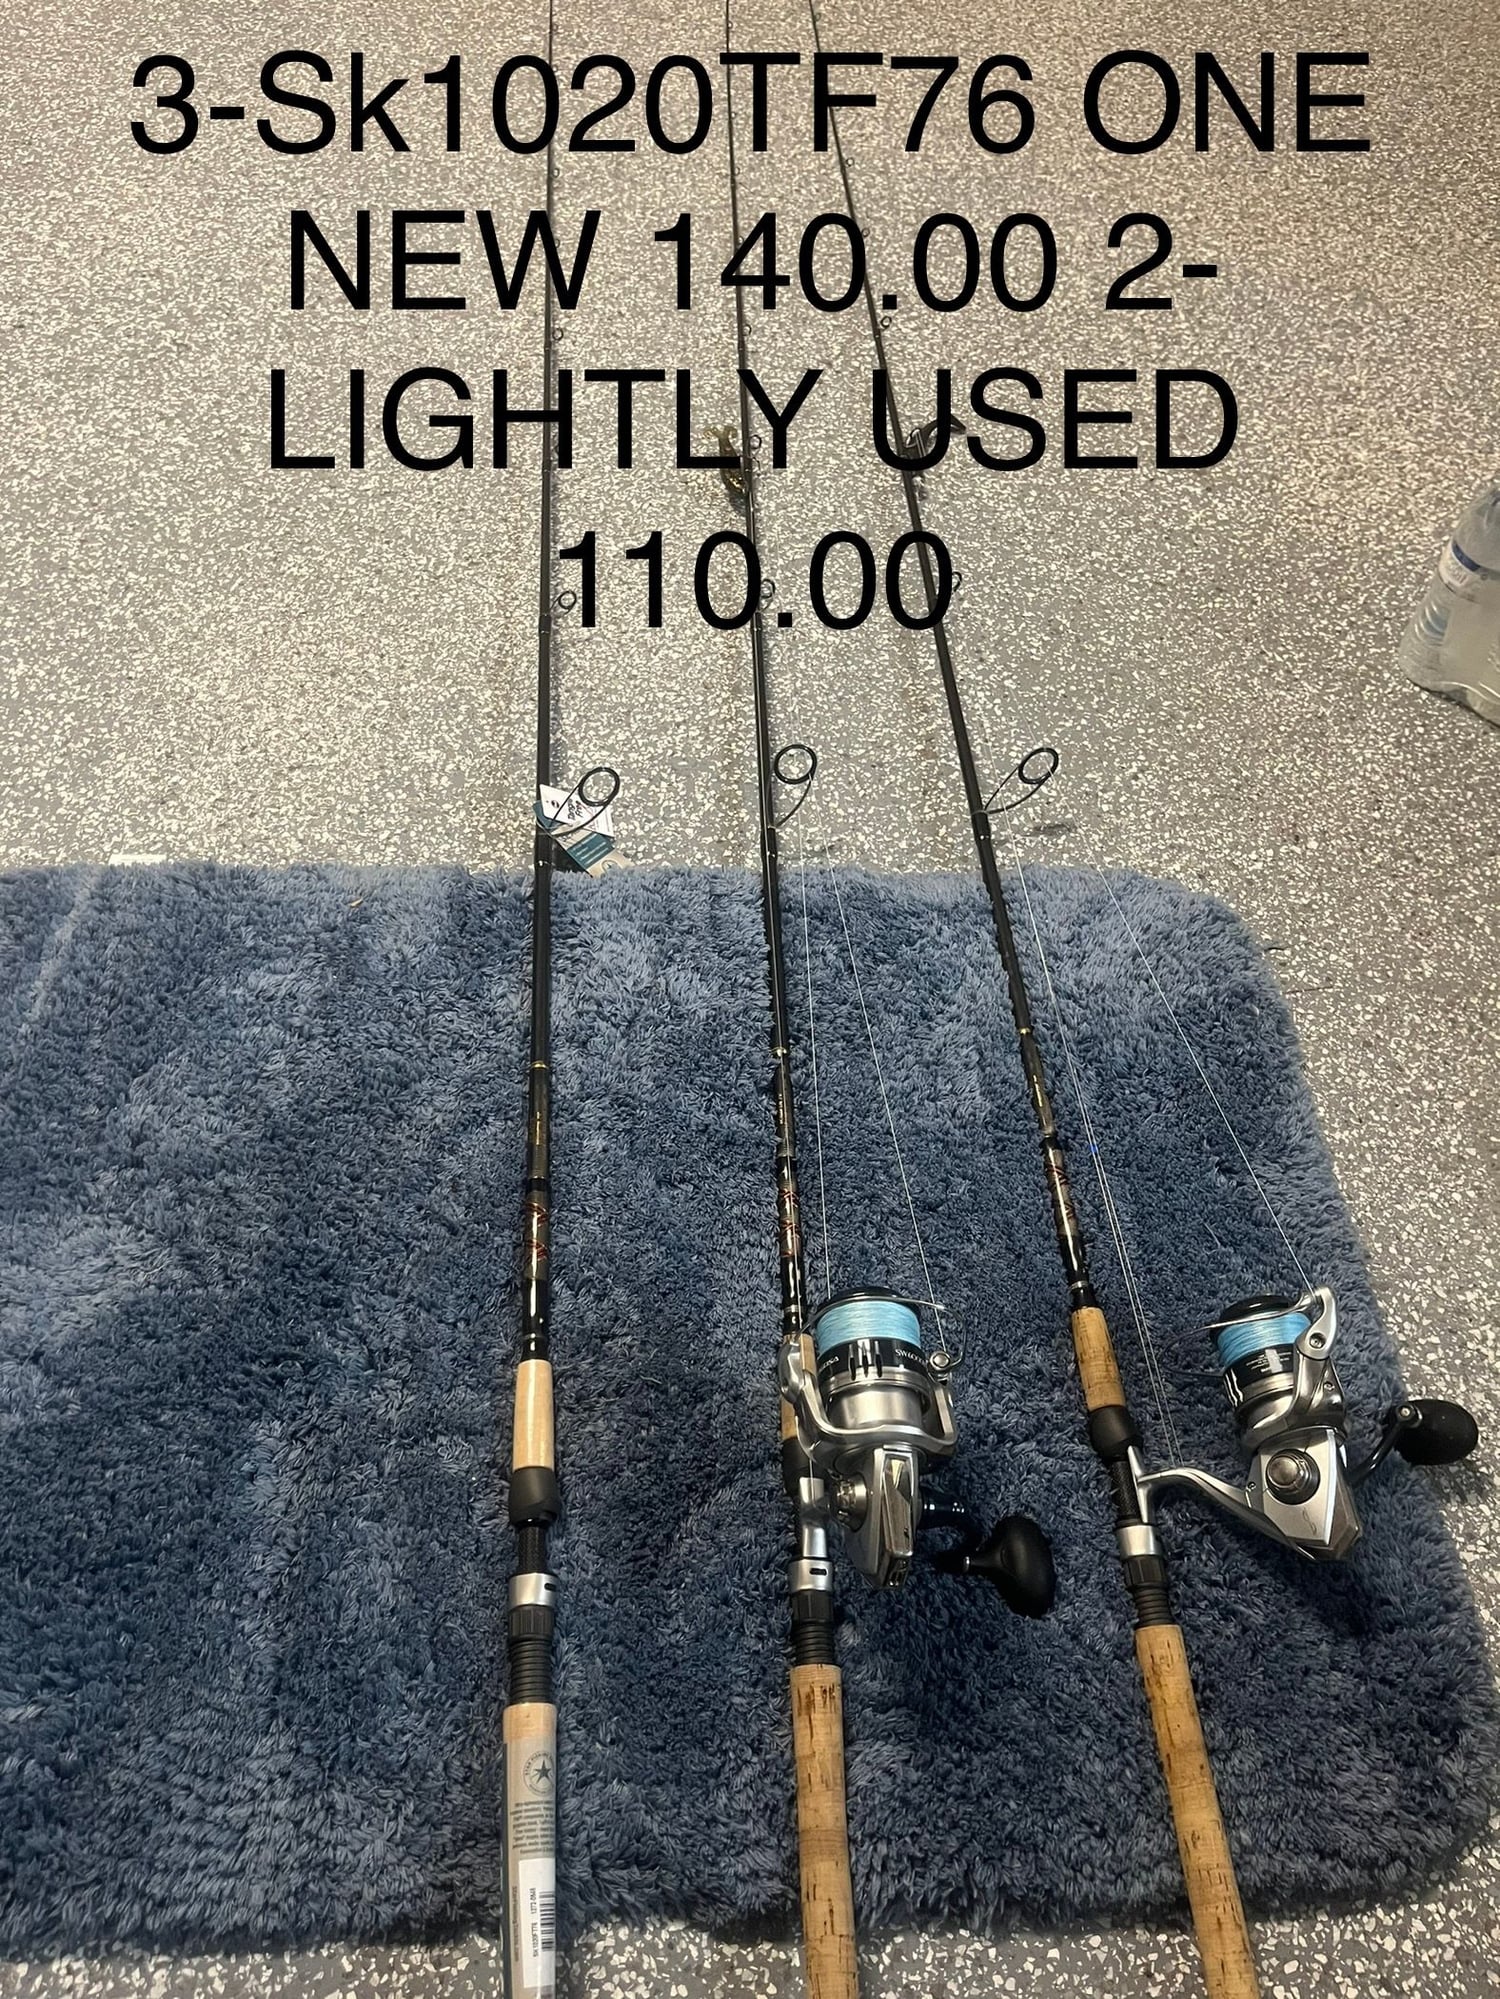 Star rod paraflex spinning rod - The Hull Truth - Boating and Fishing Forum